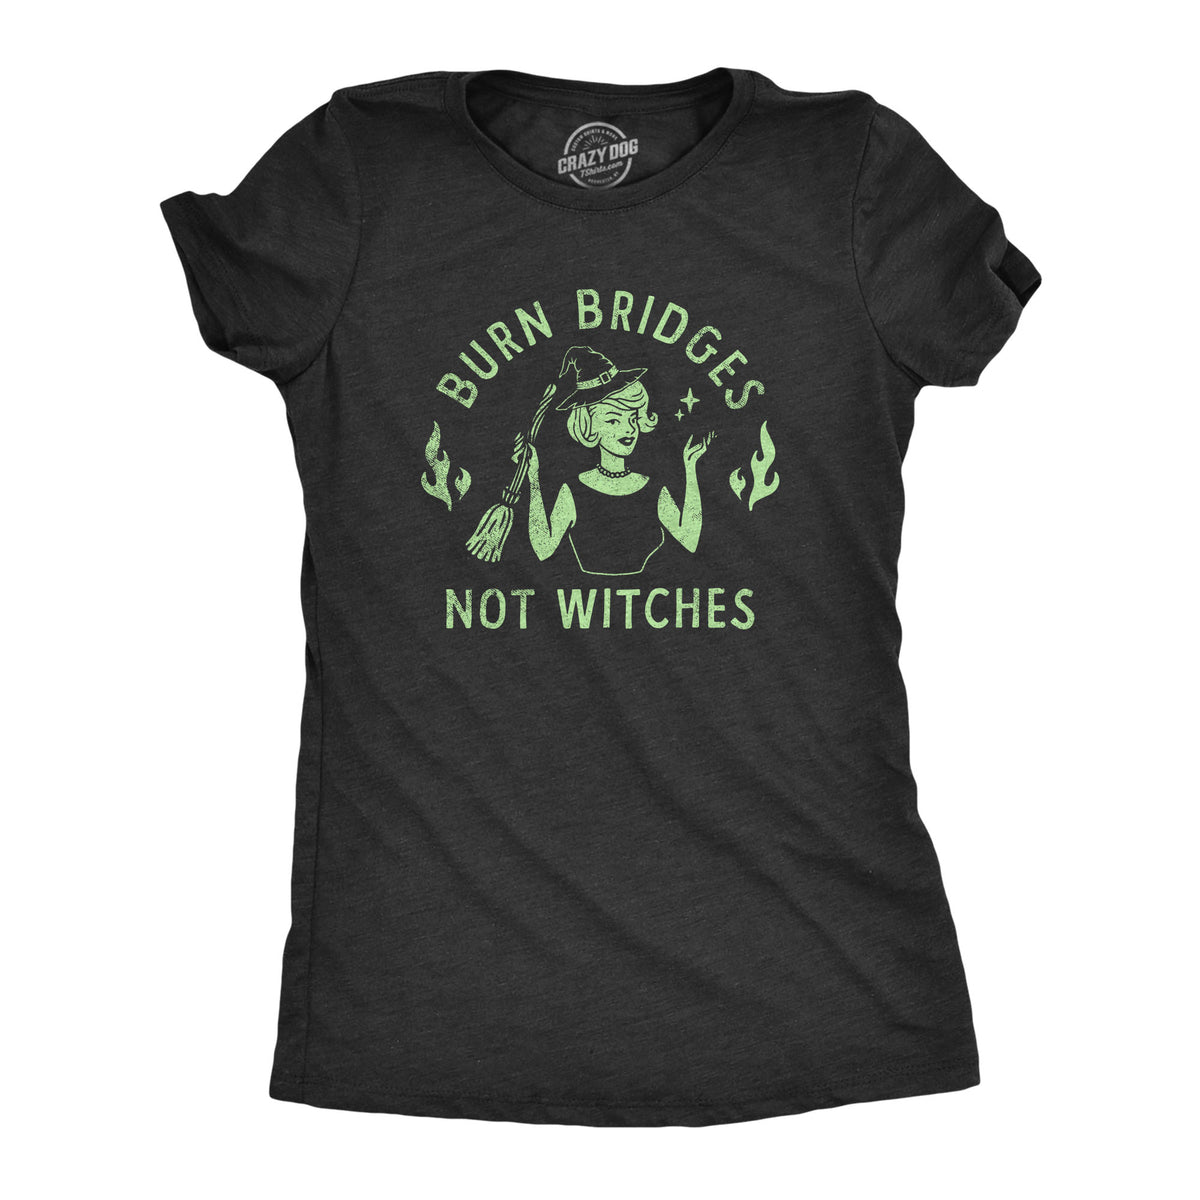 Funny Heather Black - WITCHES Burn Bridges Not Witches Womens T Shirt Nerdy Halloween sarcastic Tee